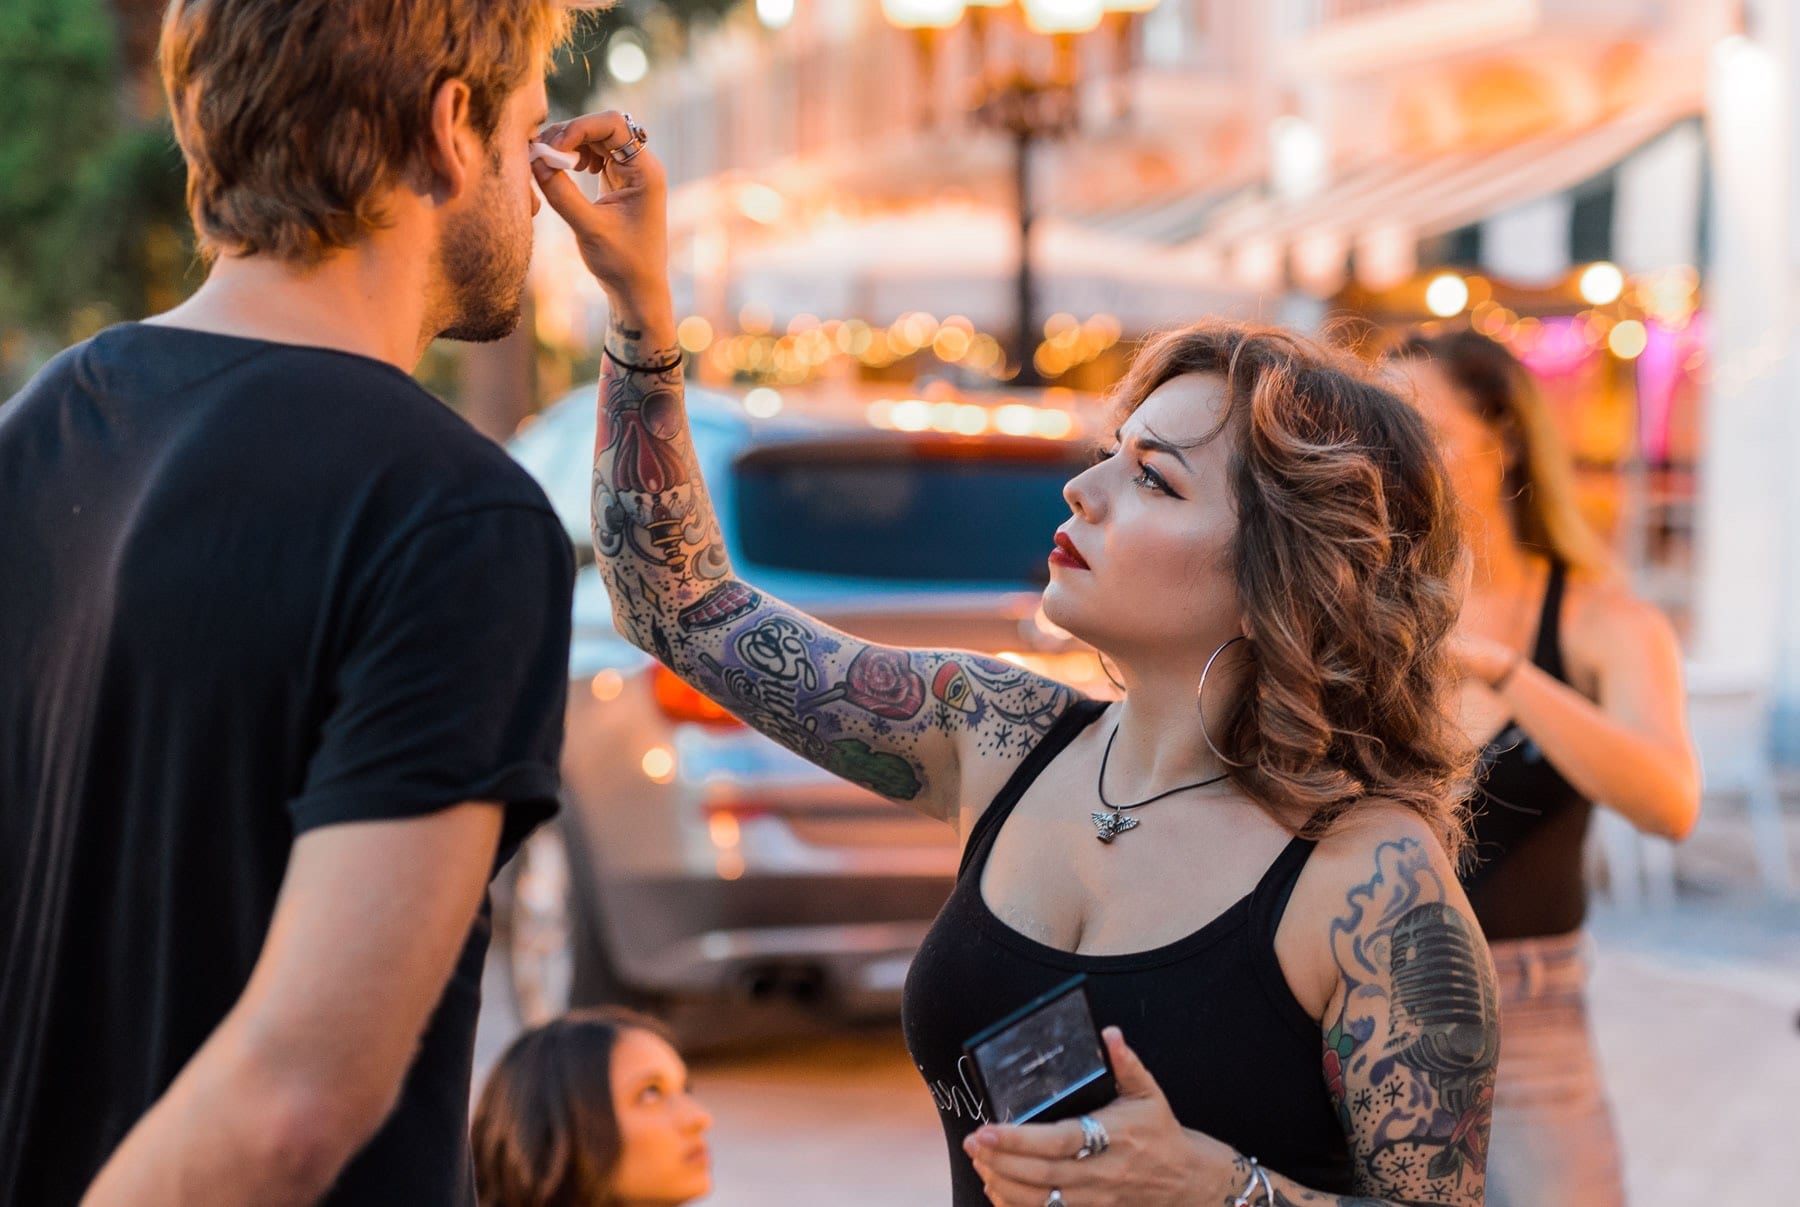 Tattooed makeup artist working on a man with two women nearby